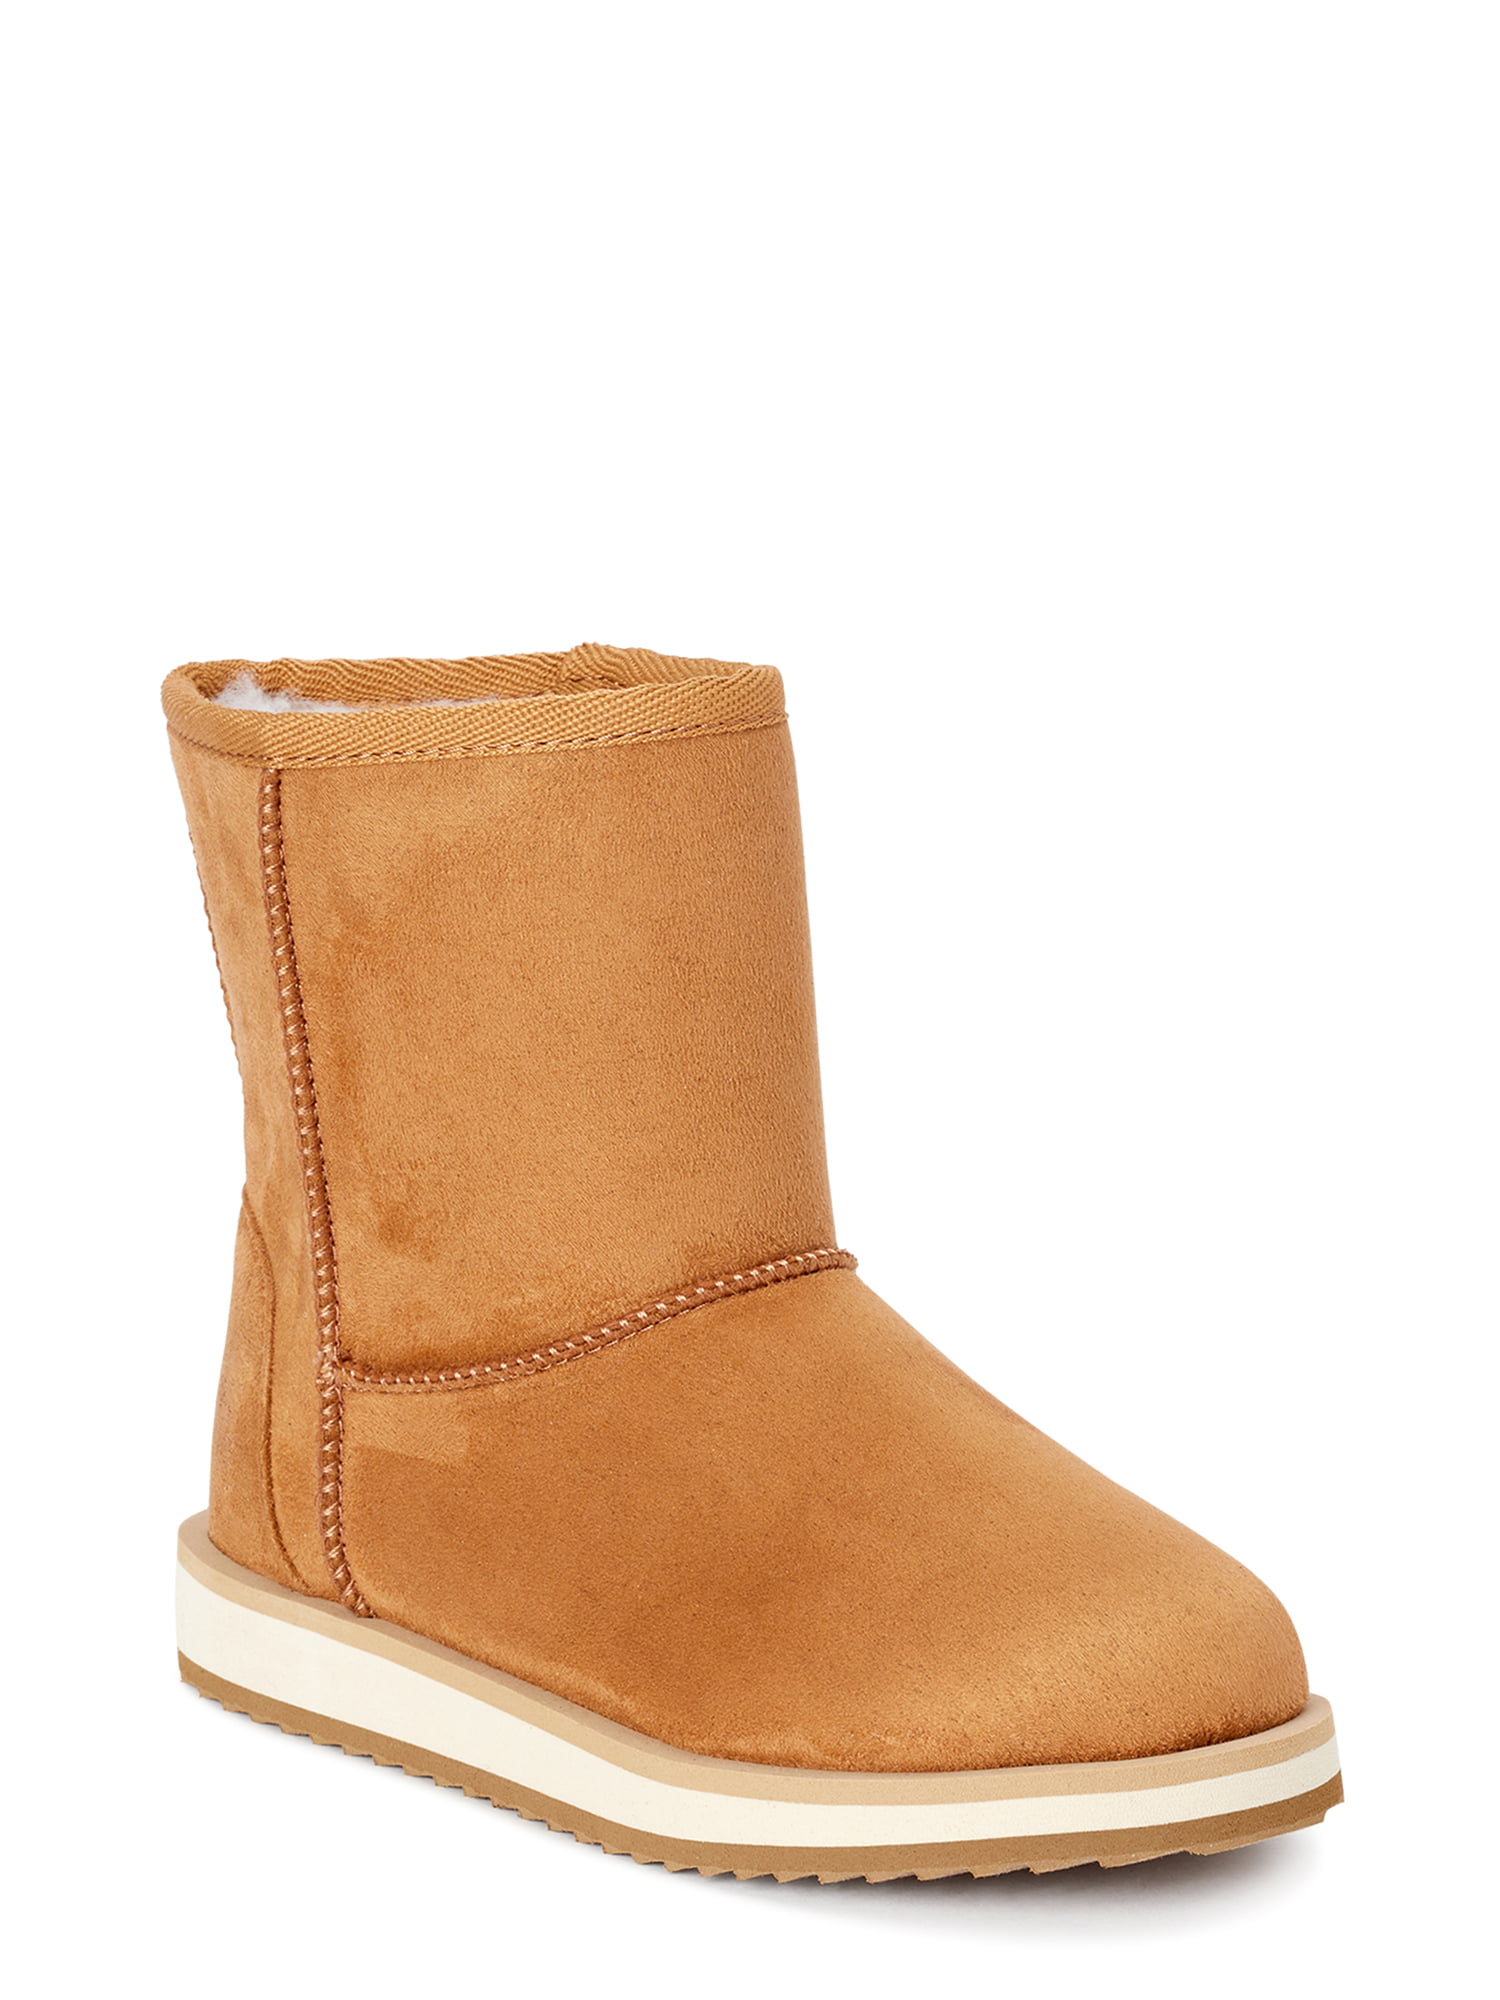 Wonder Nation Cozy Faux Shearling Boot 